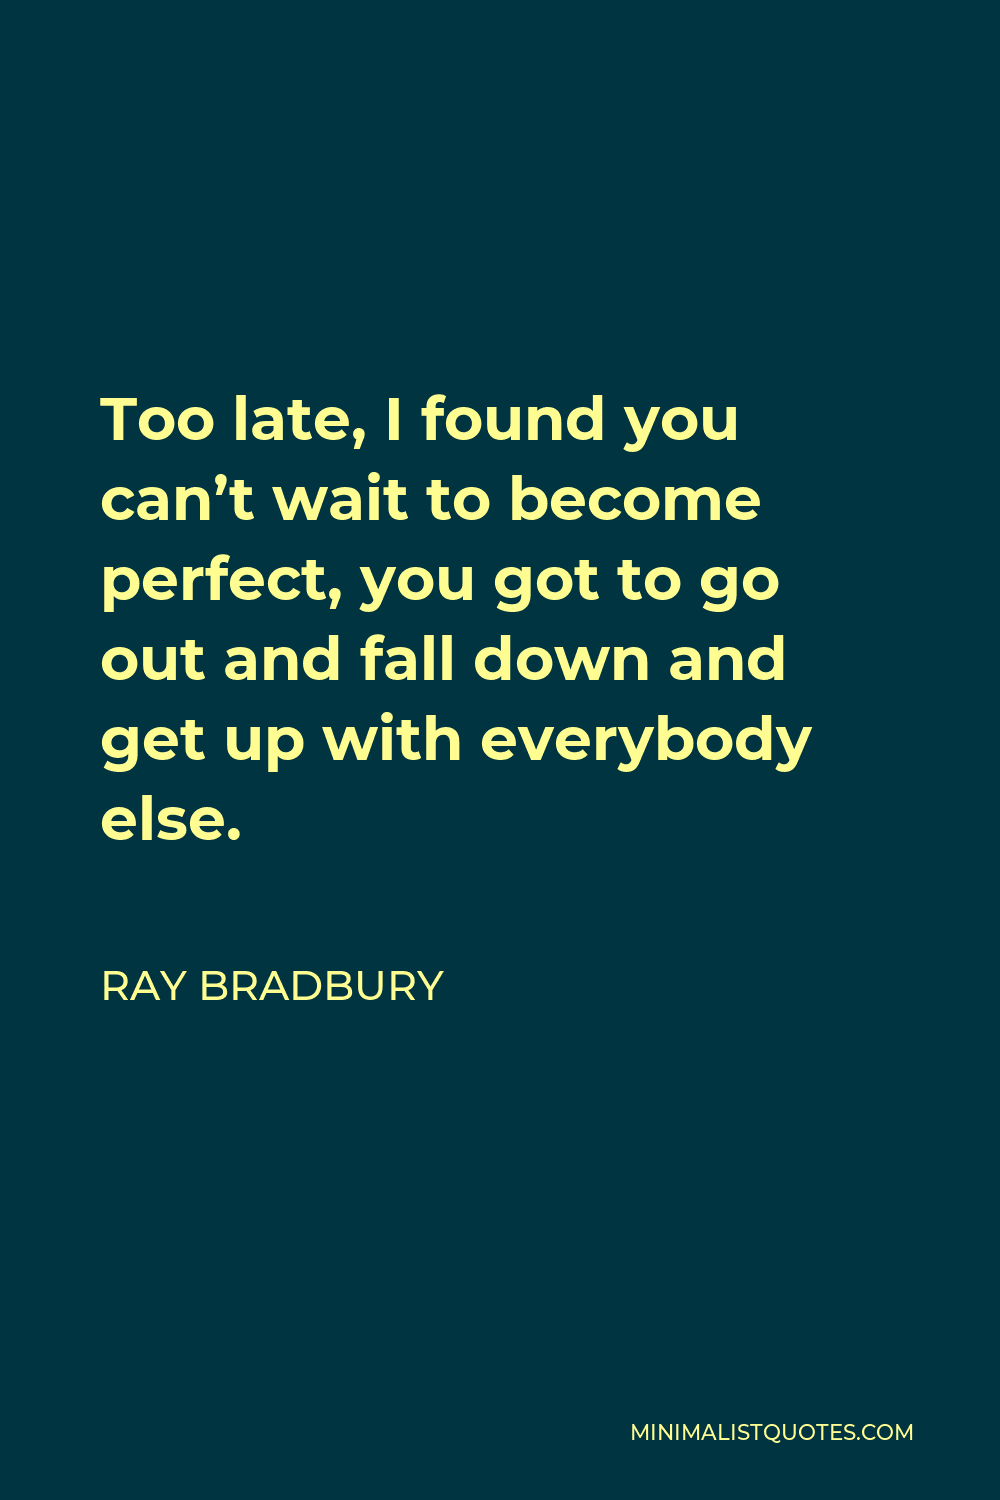 Ray Bradbury Quote - Too late, I found you can’t wait to become perfect, you got to go out and fall down and get up with everybody else.